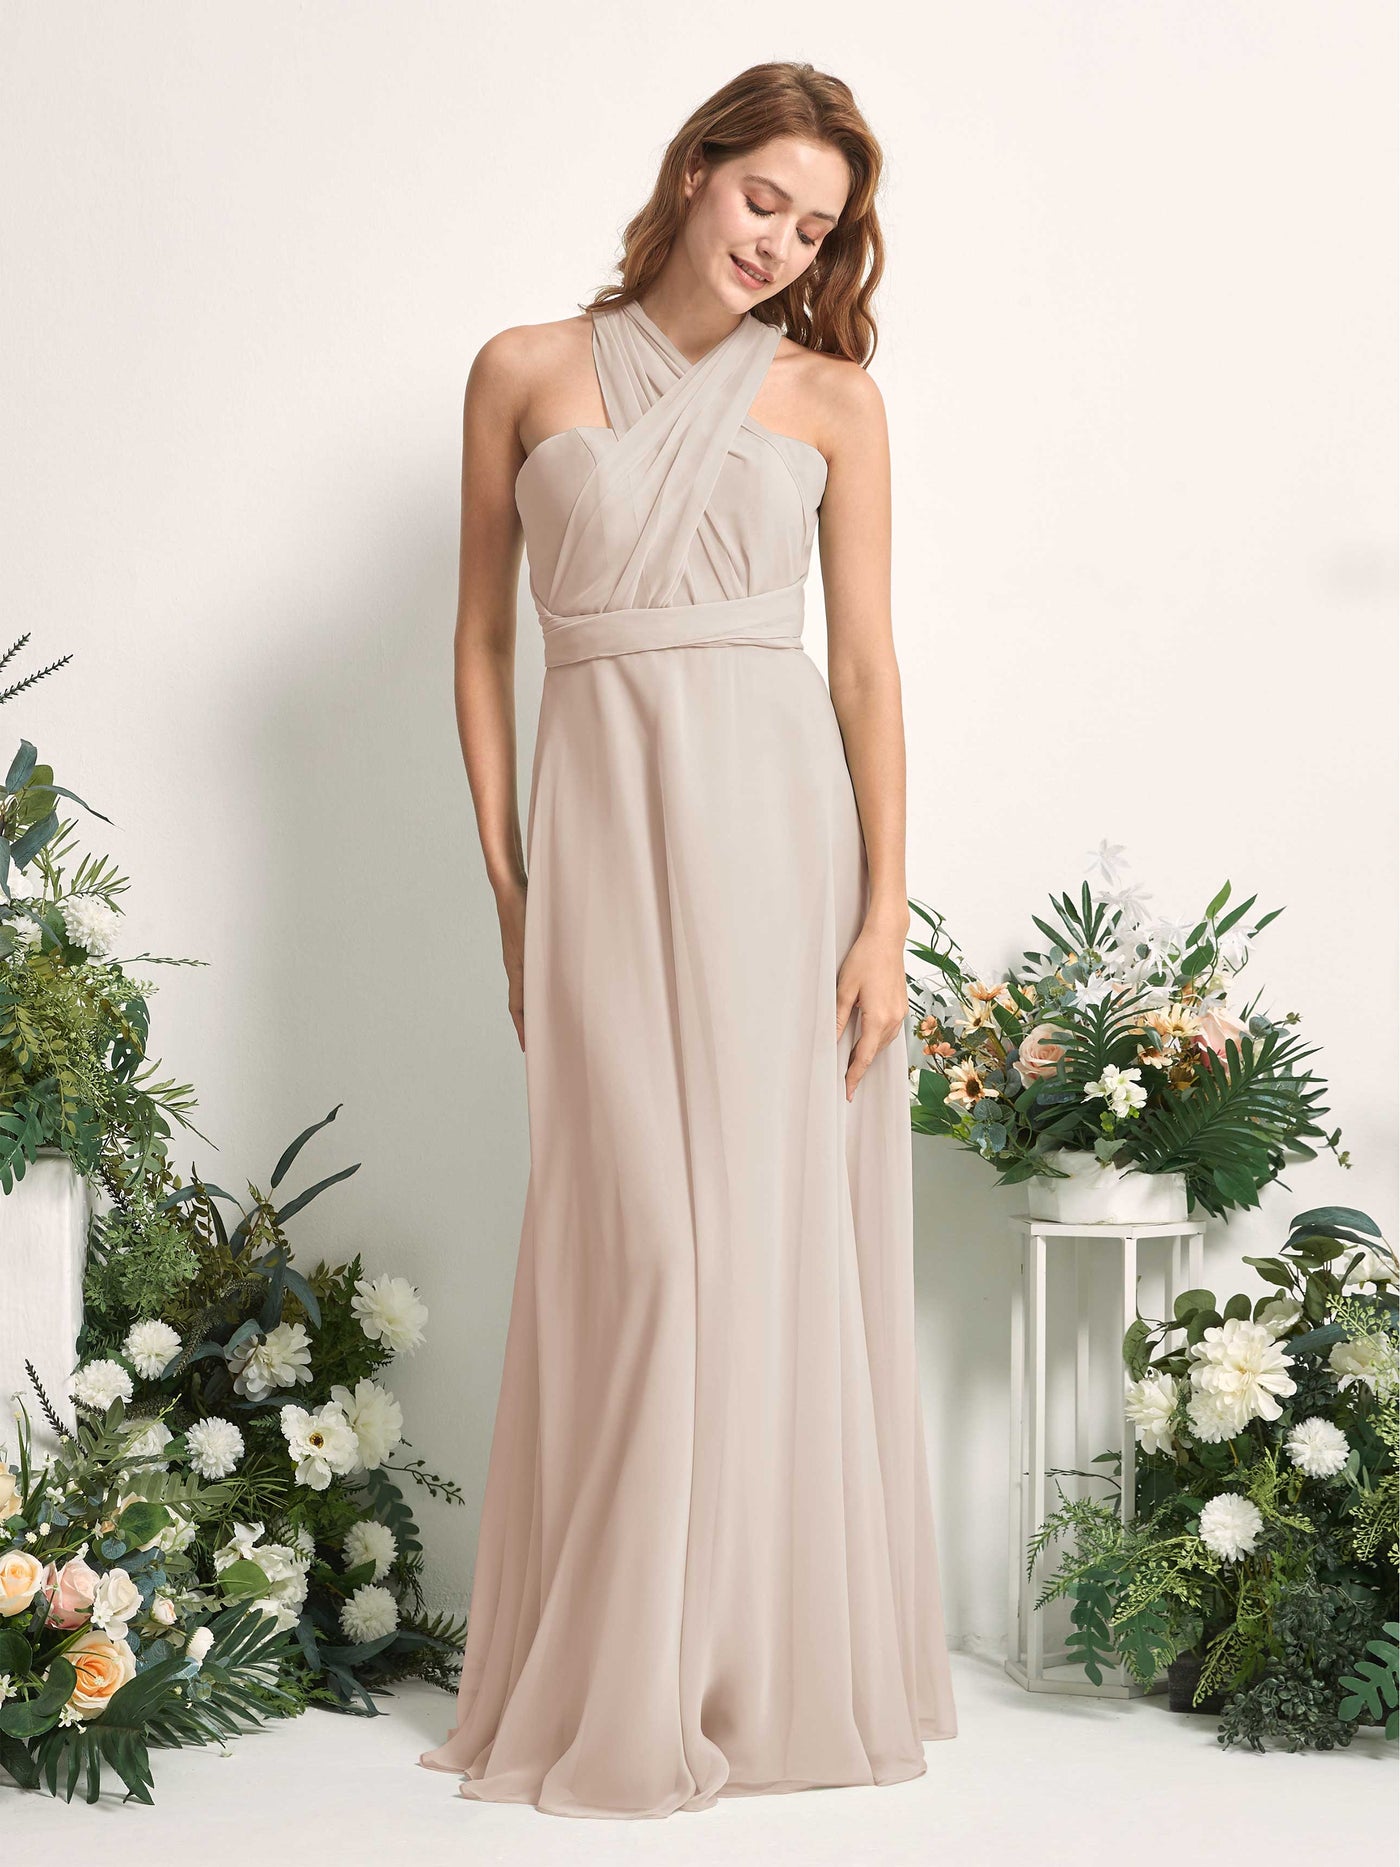 Champagne Bridesmaid Dresses Bridesmaid Dress A-line Chiffon Halter Full Length Short Sleeves Wedding Party Dress (81226316)#color_champagne